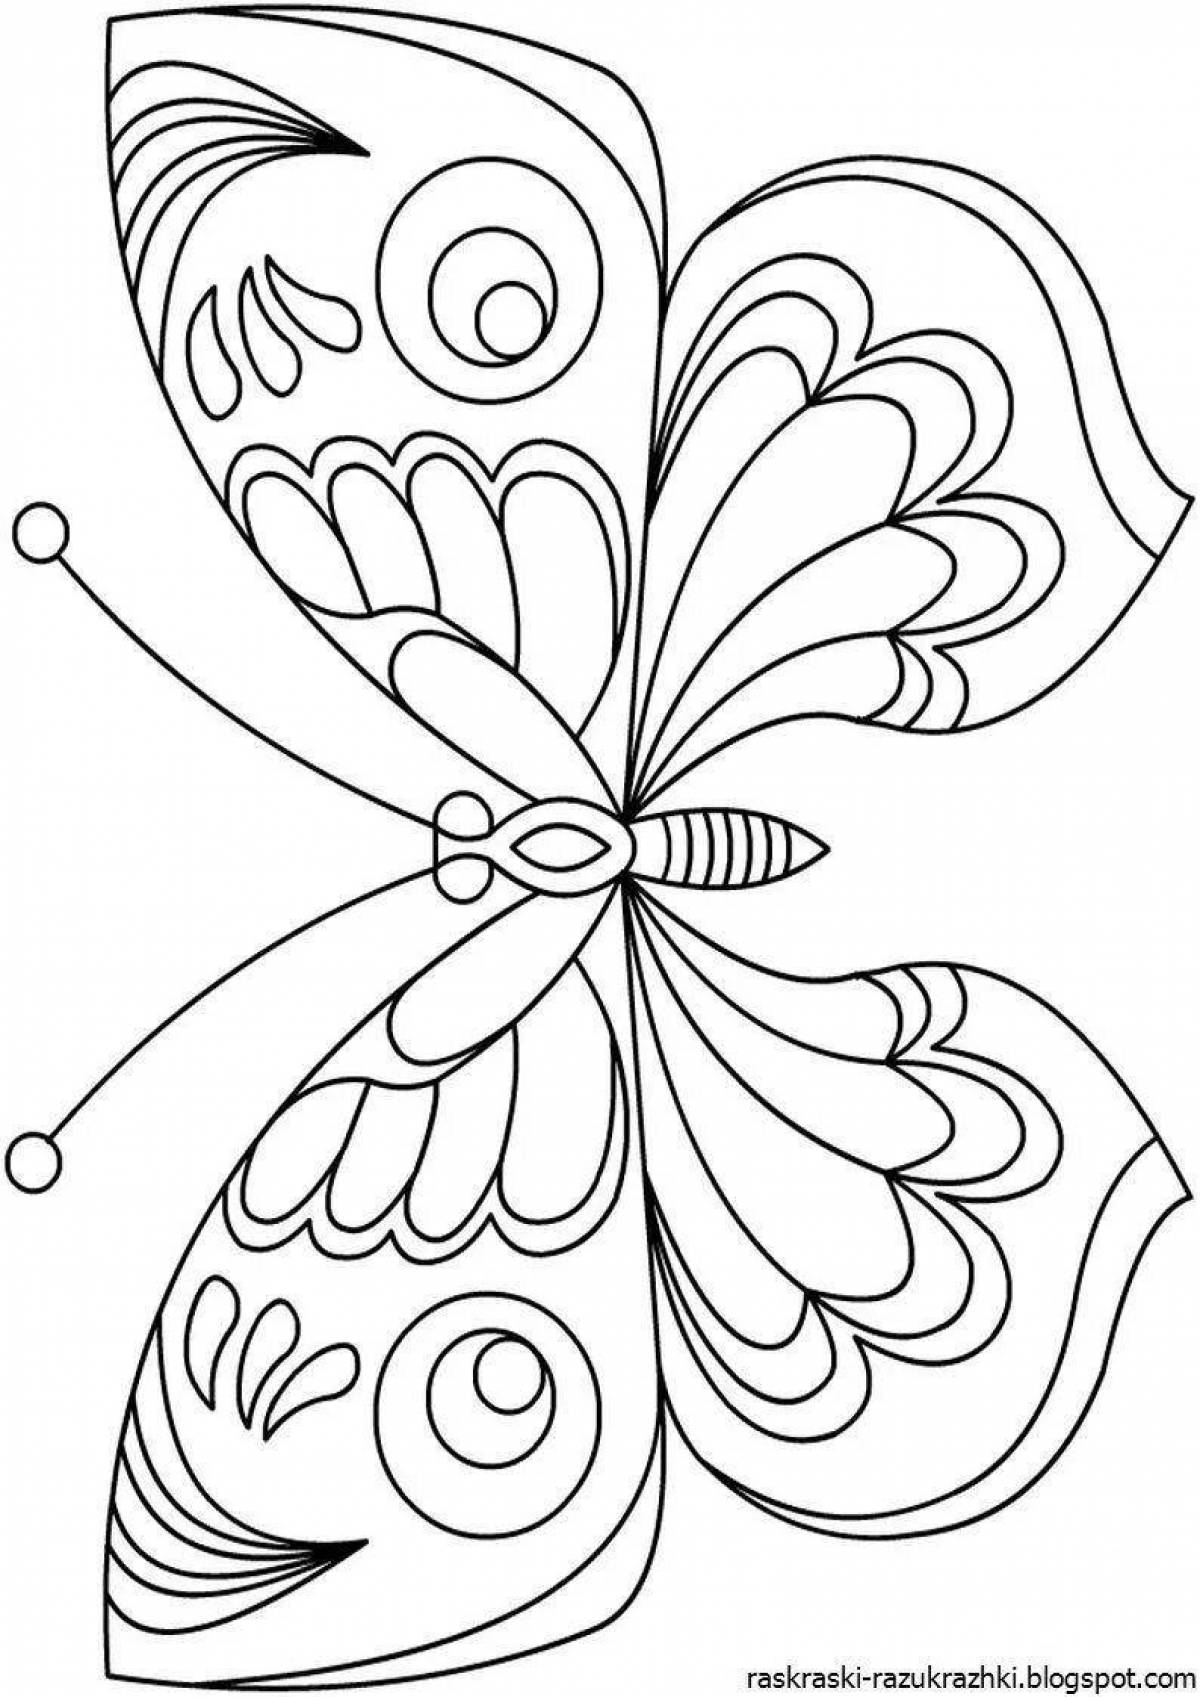 Coloring book shining butterfly for children 5-6 years old